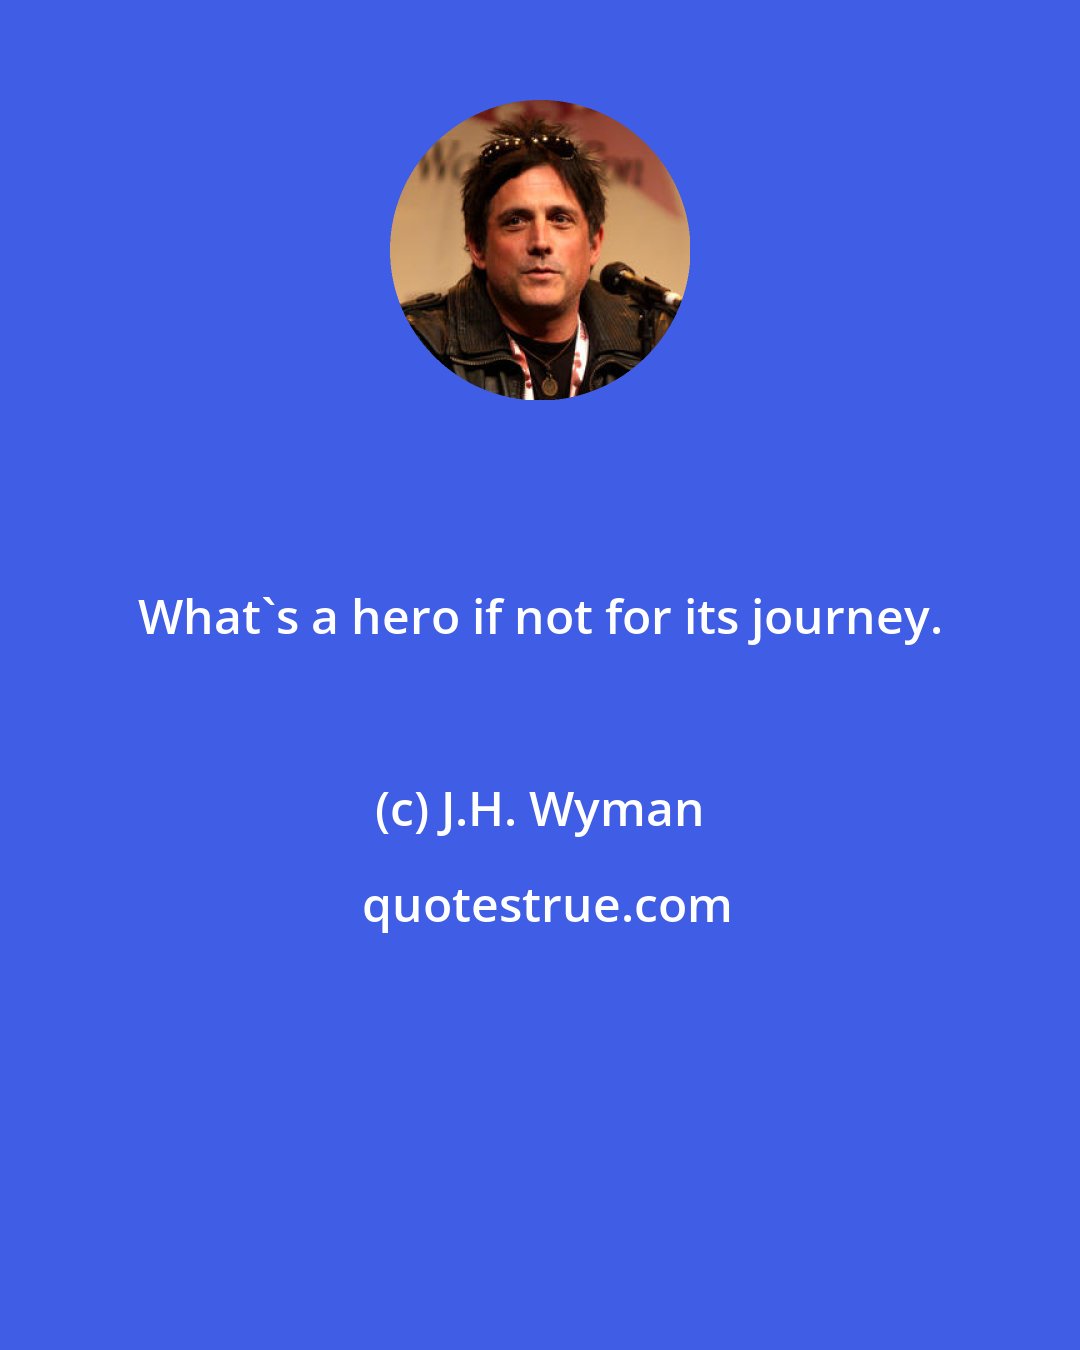 J.H. Wyman: What's a hero if not for its journey.